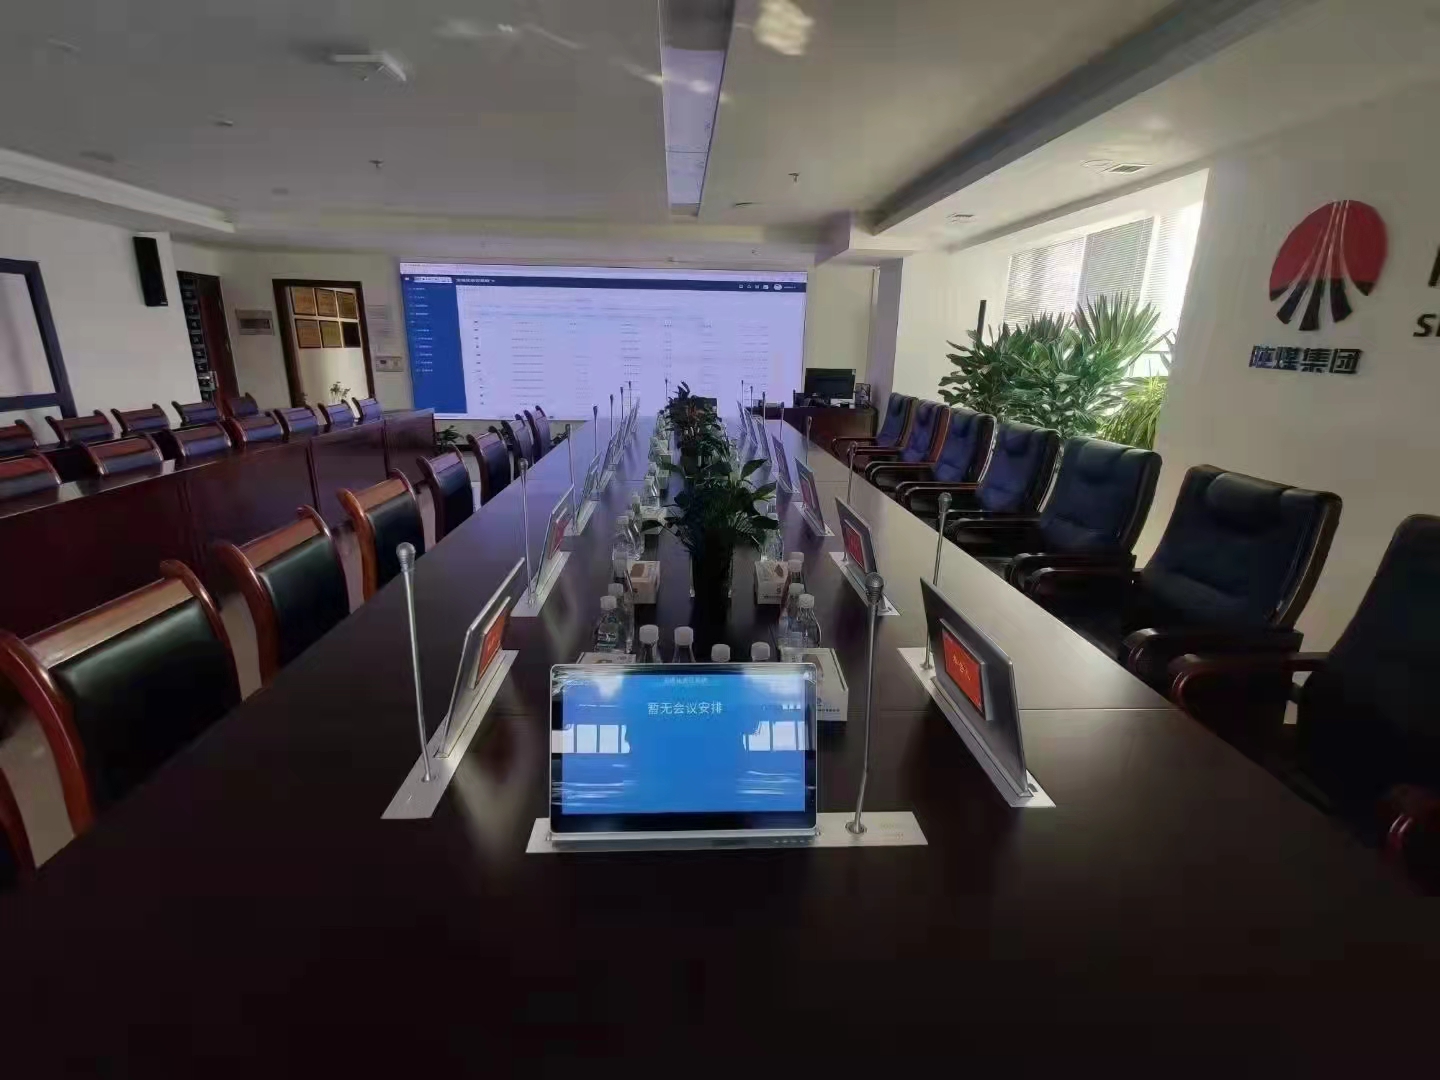 The Main Functions of the Video Conferencing System